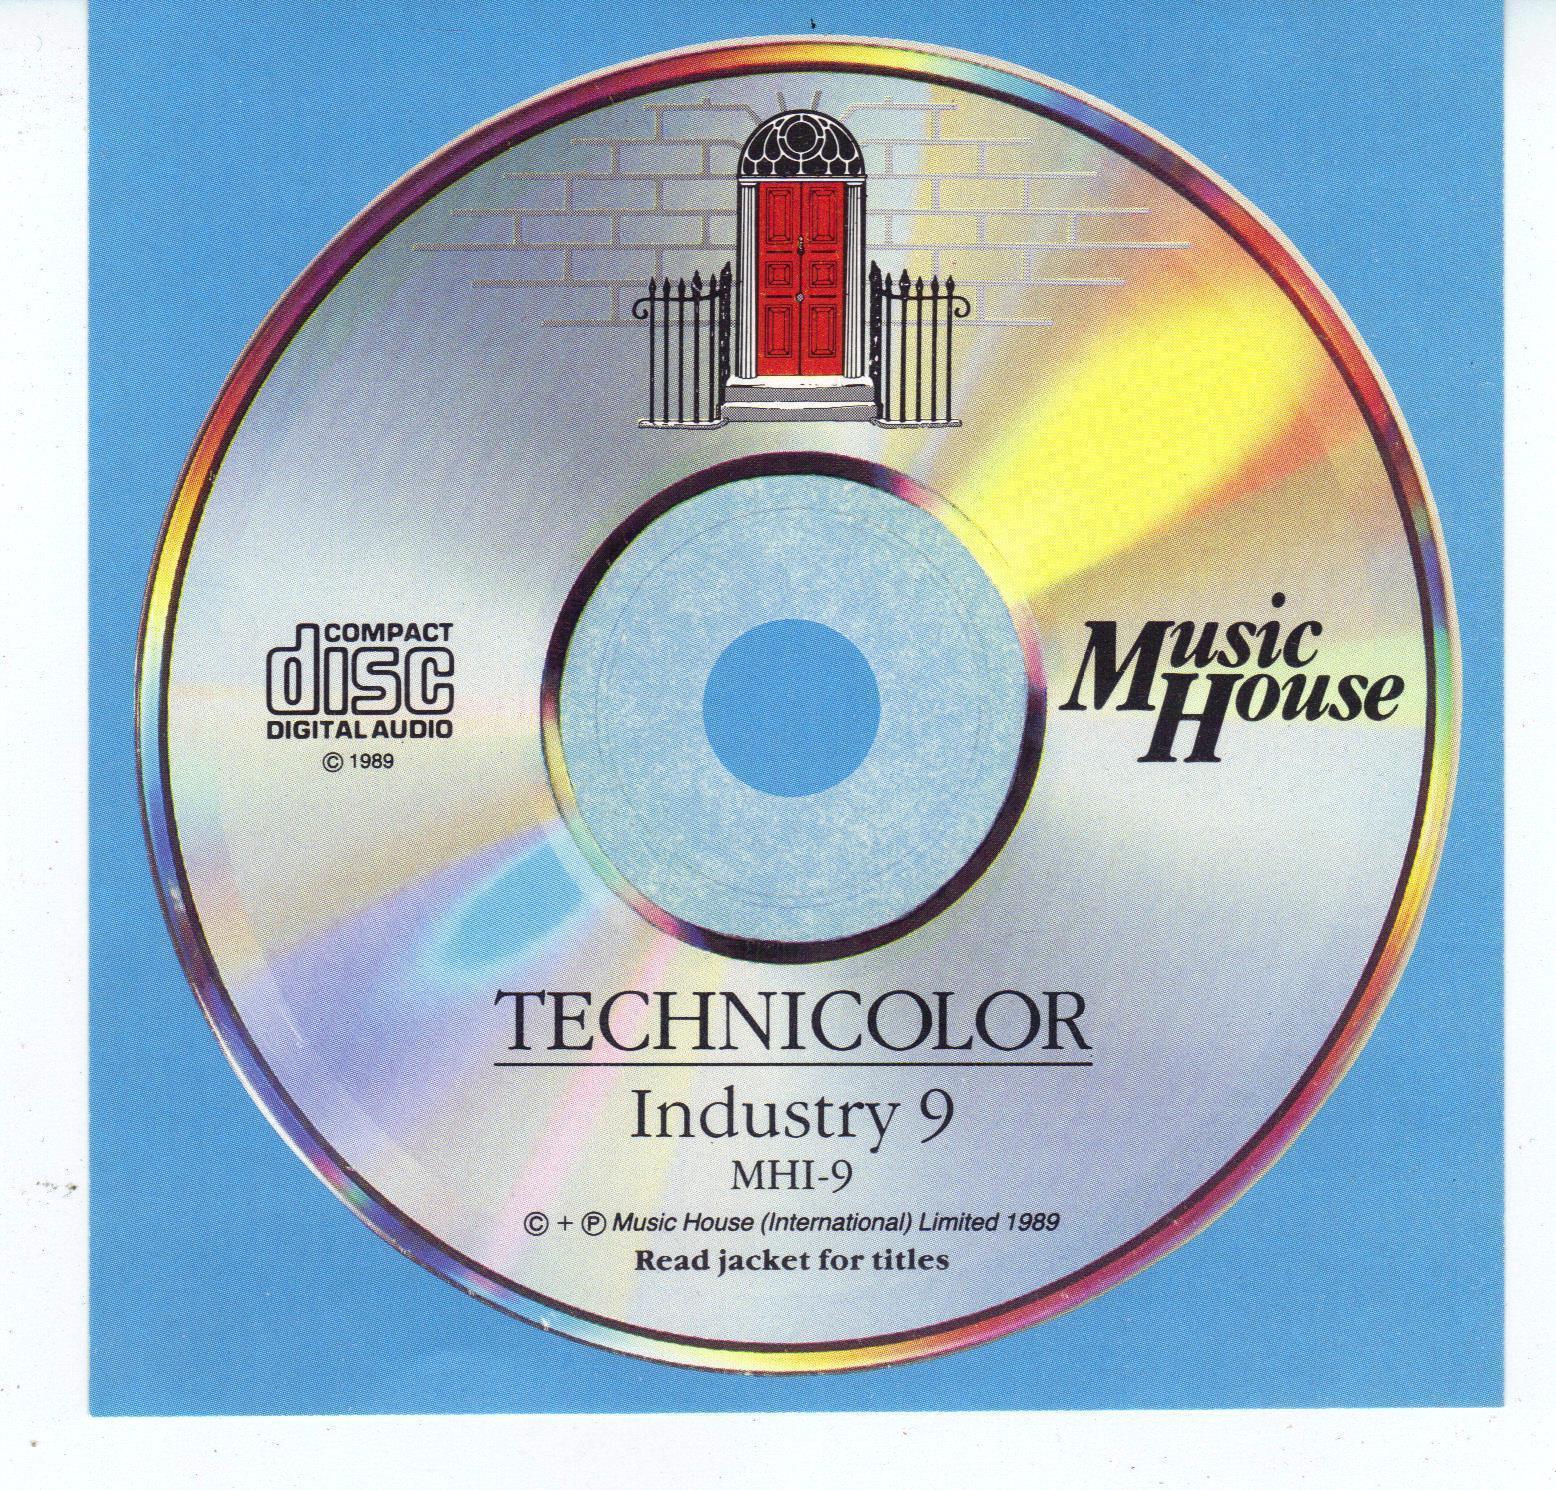 MO FOSTER - Mo Foster / Mike Vickers ‎: Industry 9 - Technicolor cover 